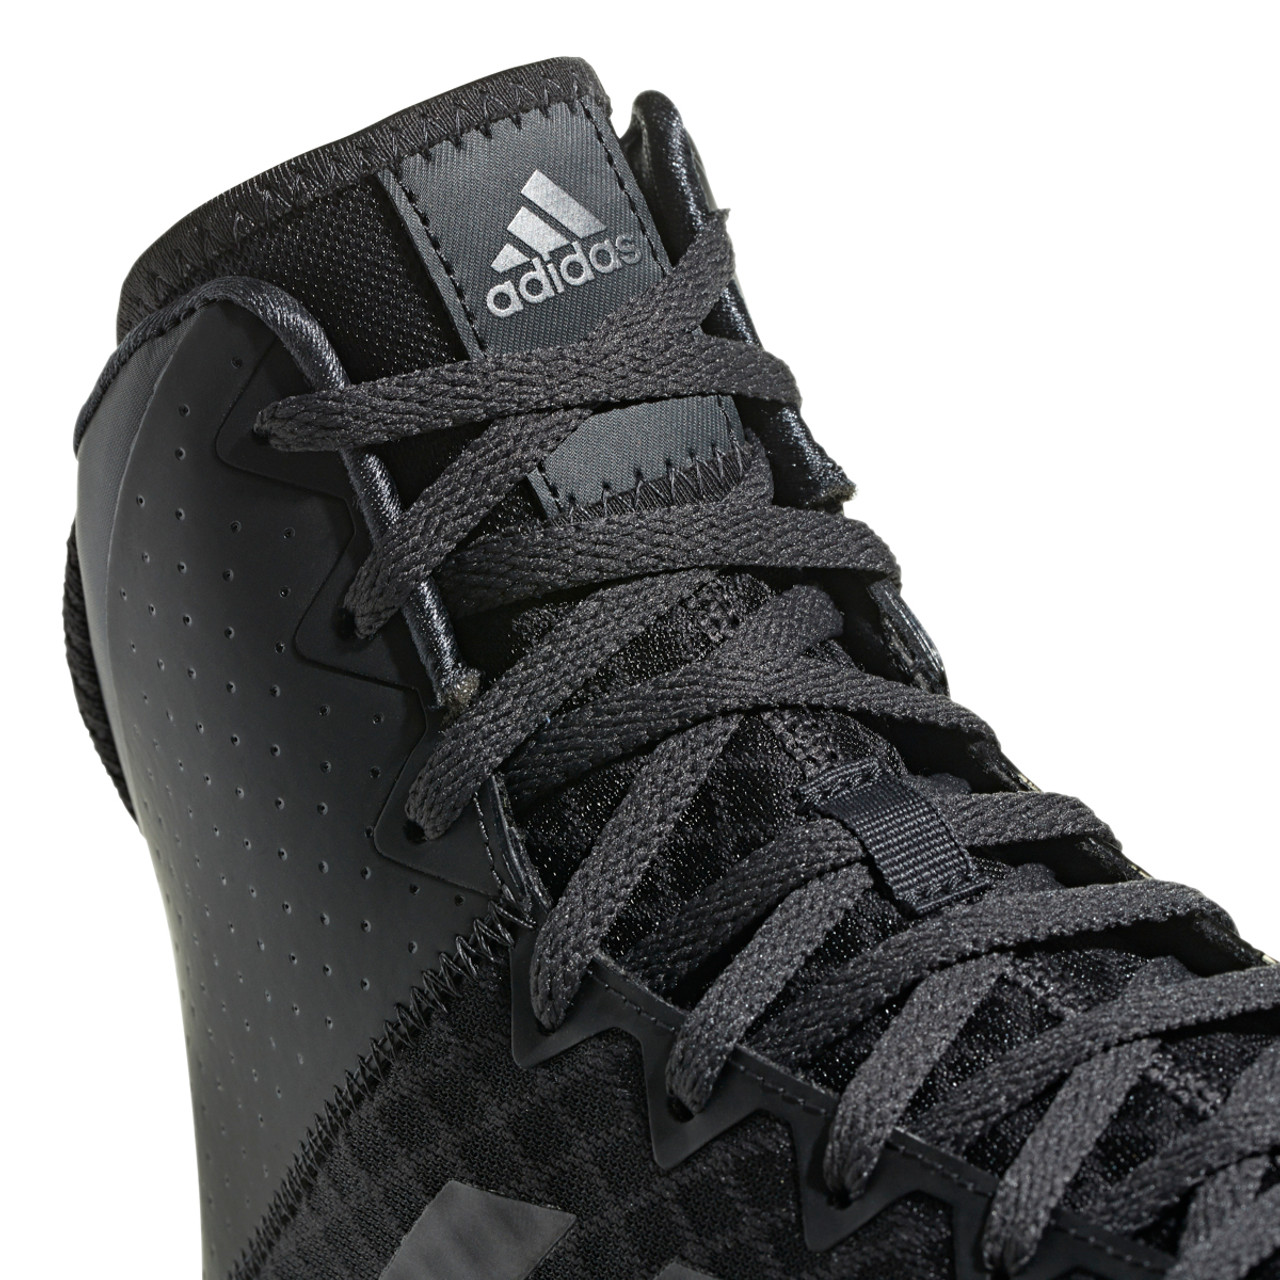 Adidas Mat Wizard 4 Adult Wrestling Shoes AC6971 - Carbon, Black